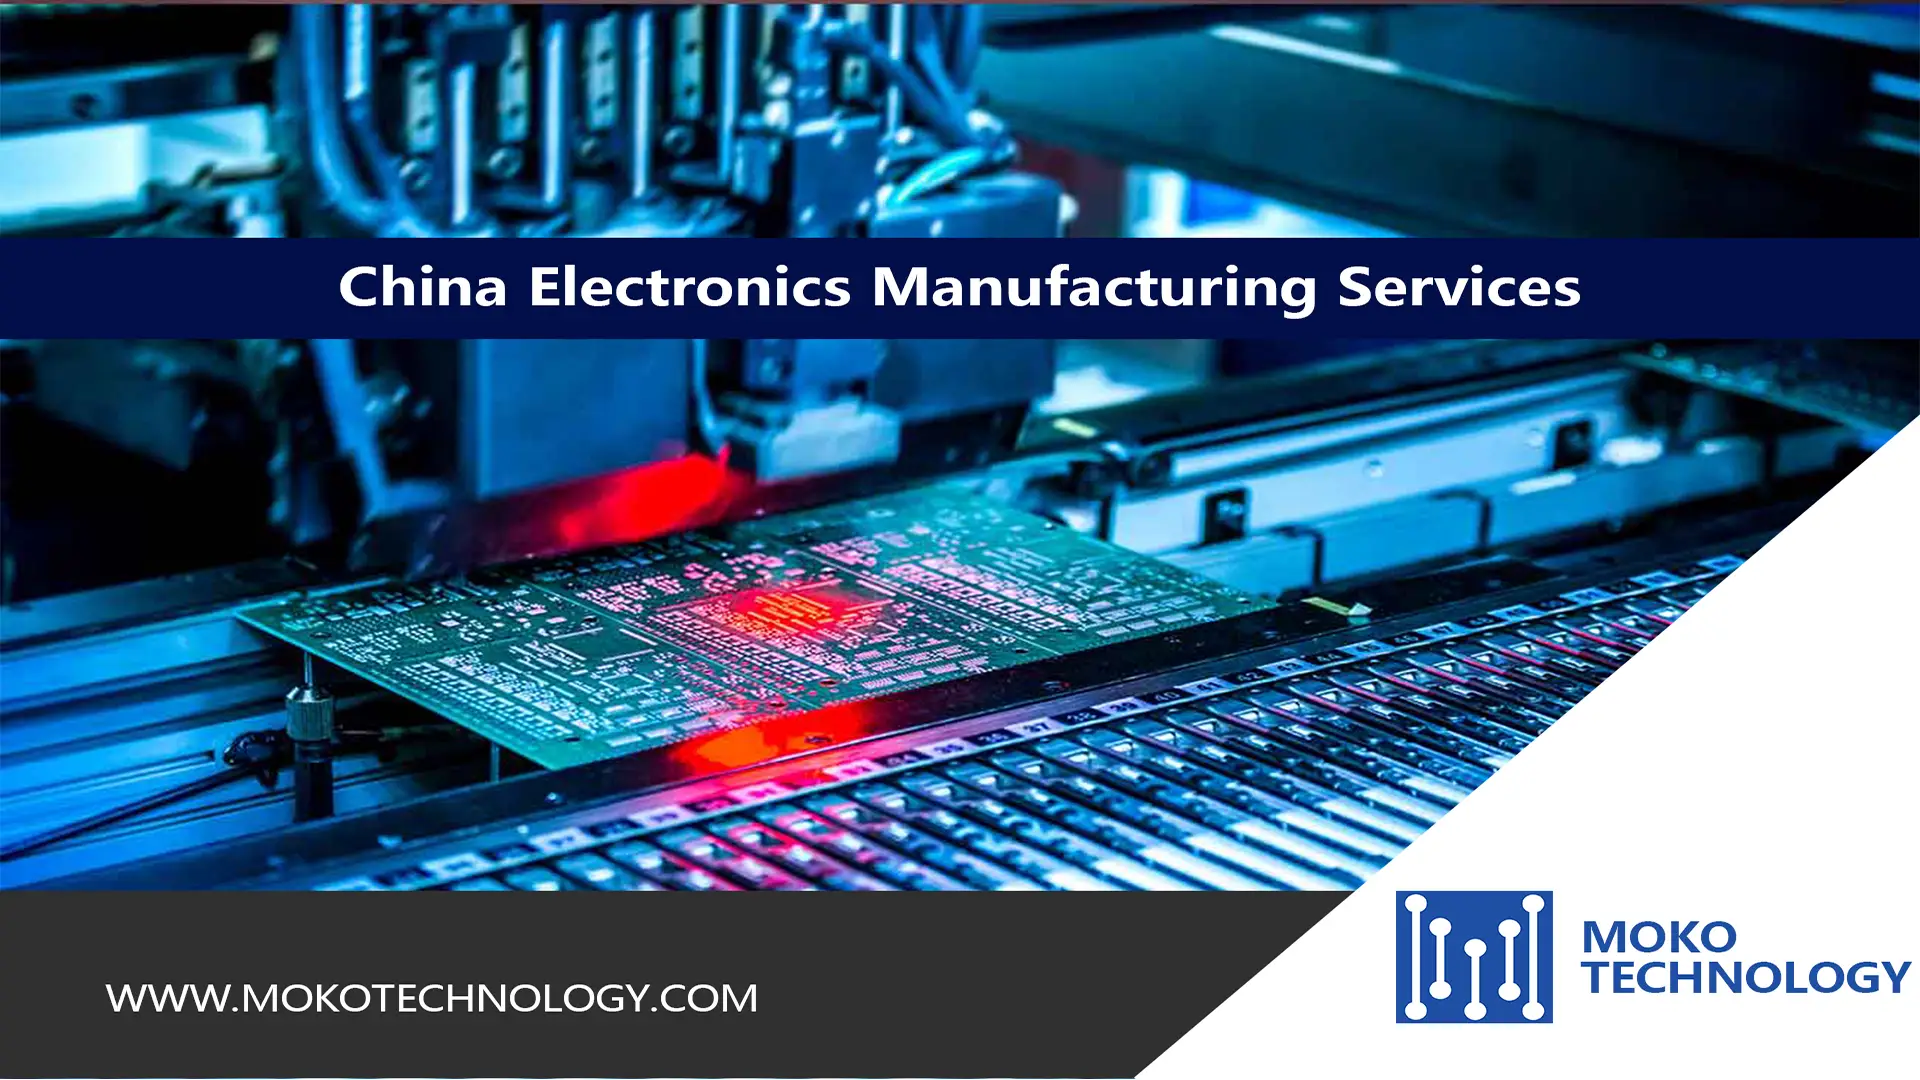 China Electronics Manufacturing Services